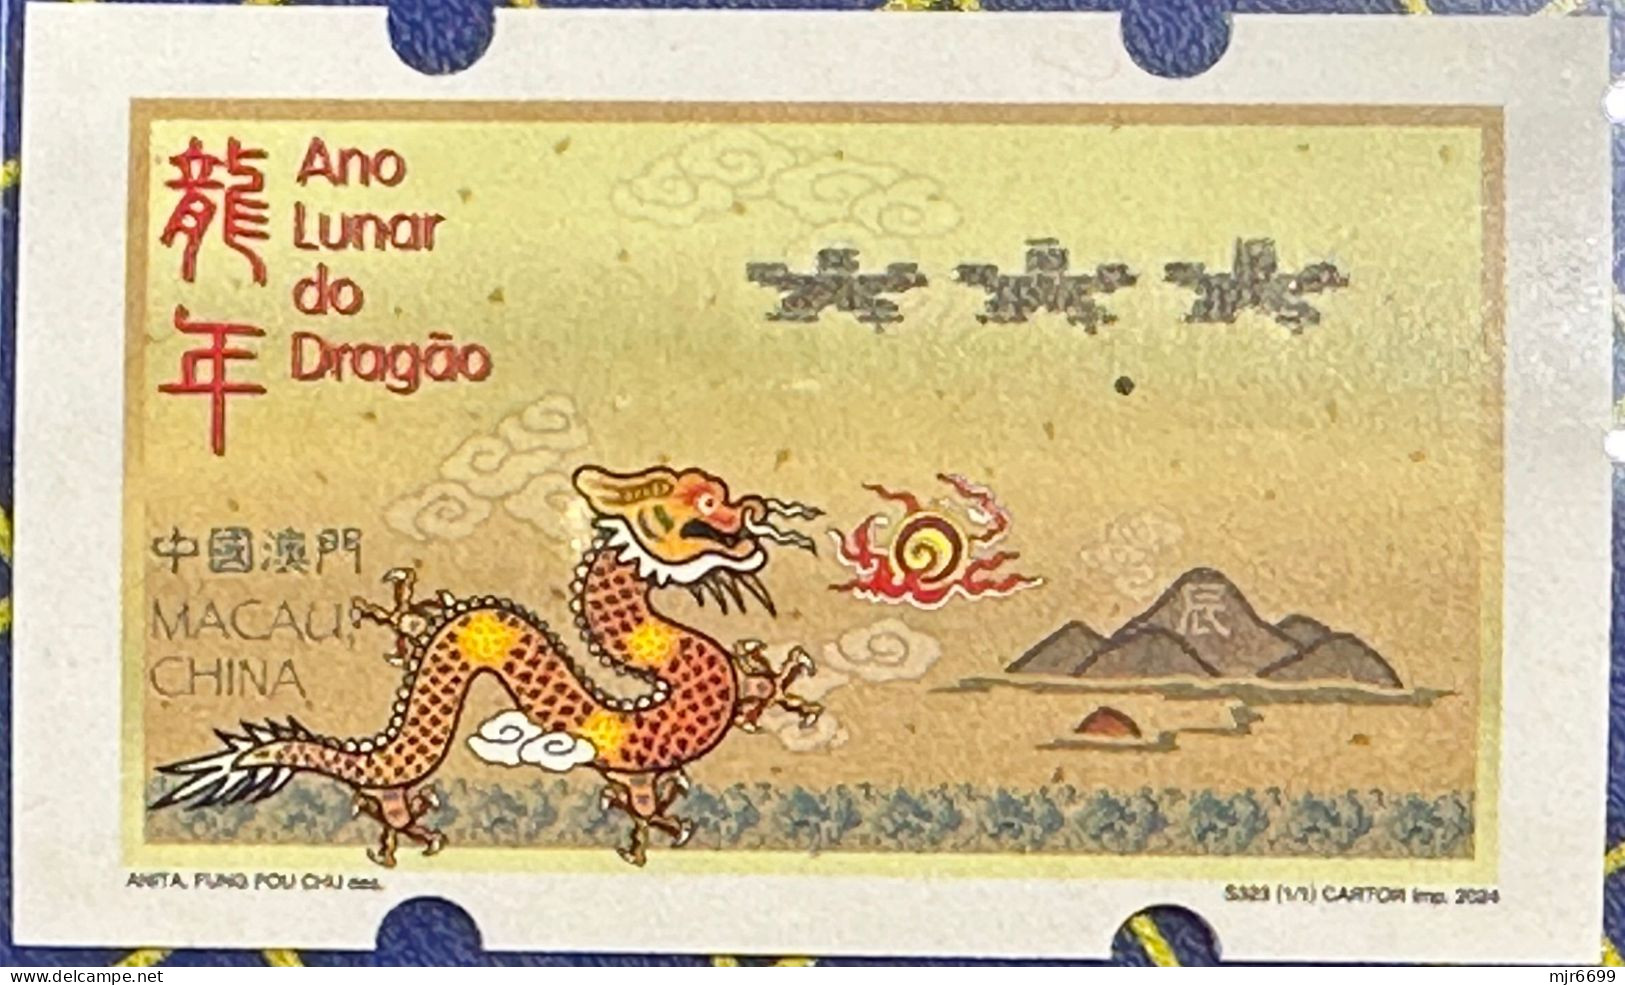 2024 LUNAR NEW YEAR OF THE DRAGON NAGLER MACHINE ATM LABELS W\3 STARS - Distribuidores